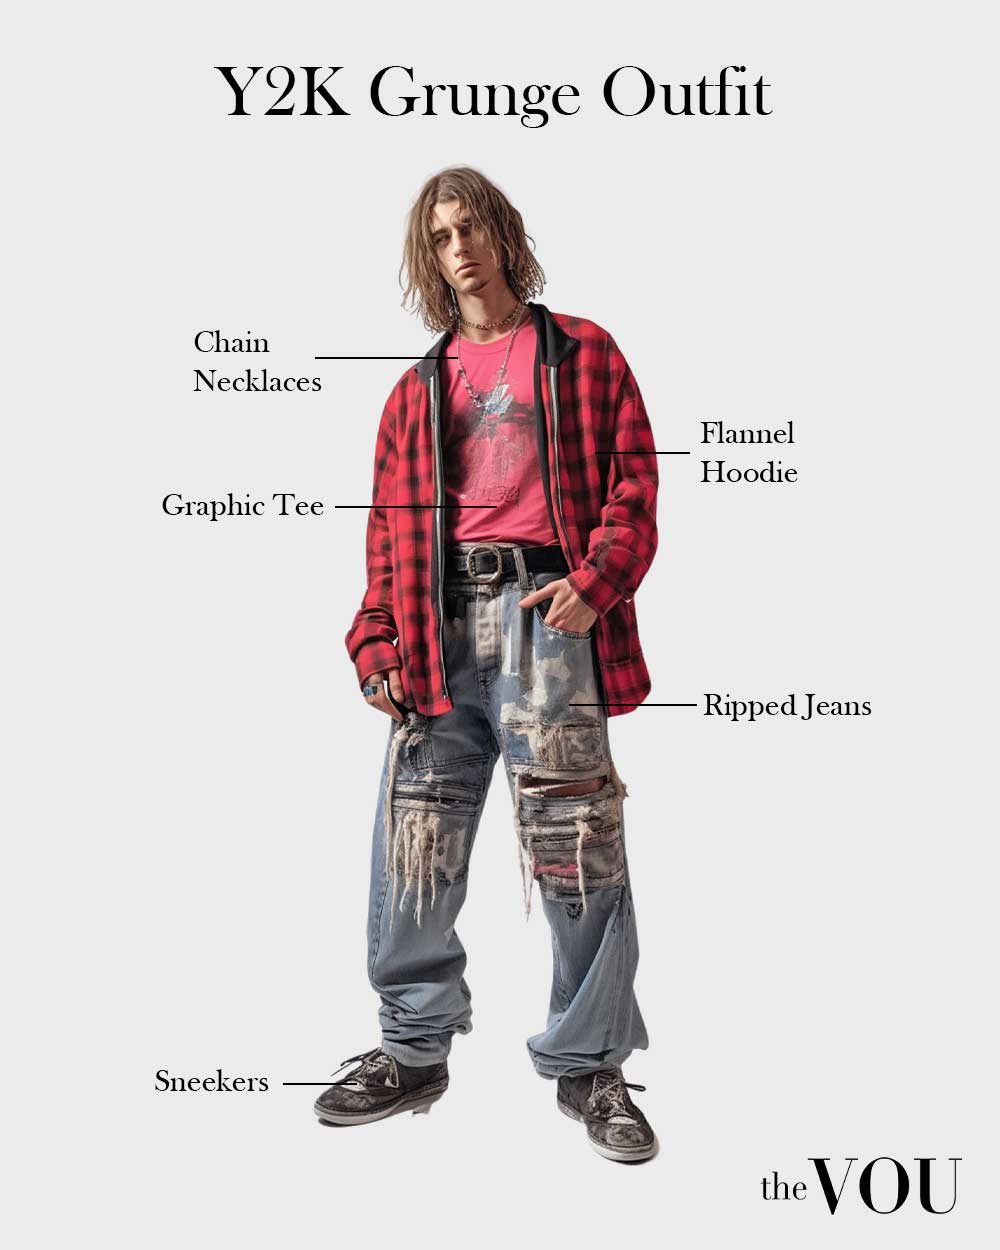 Y2K Grunge Style outfit for men